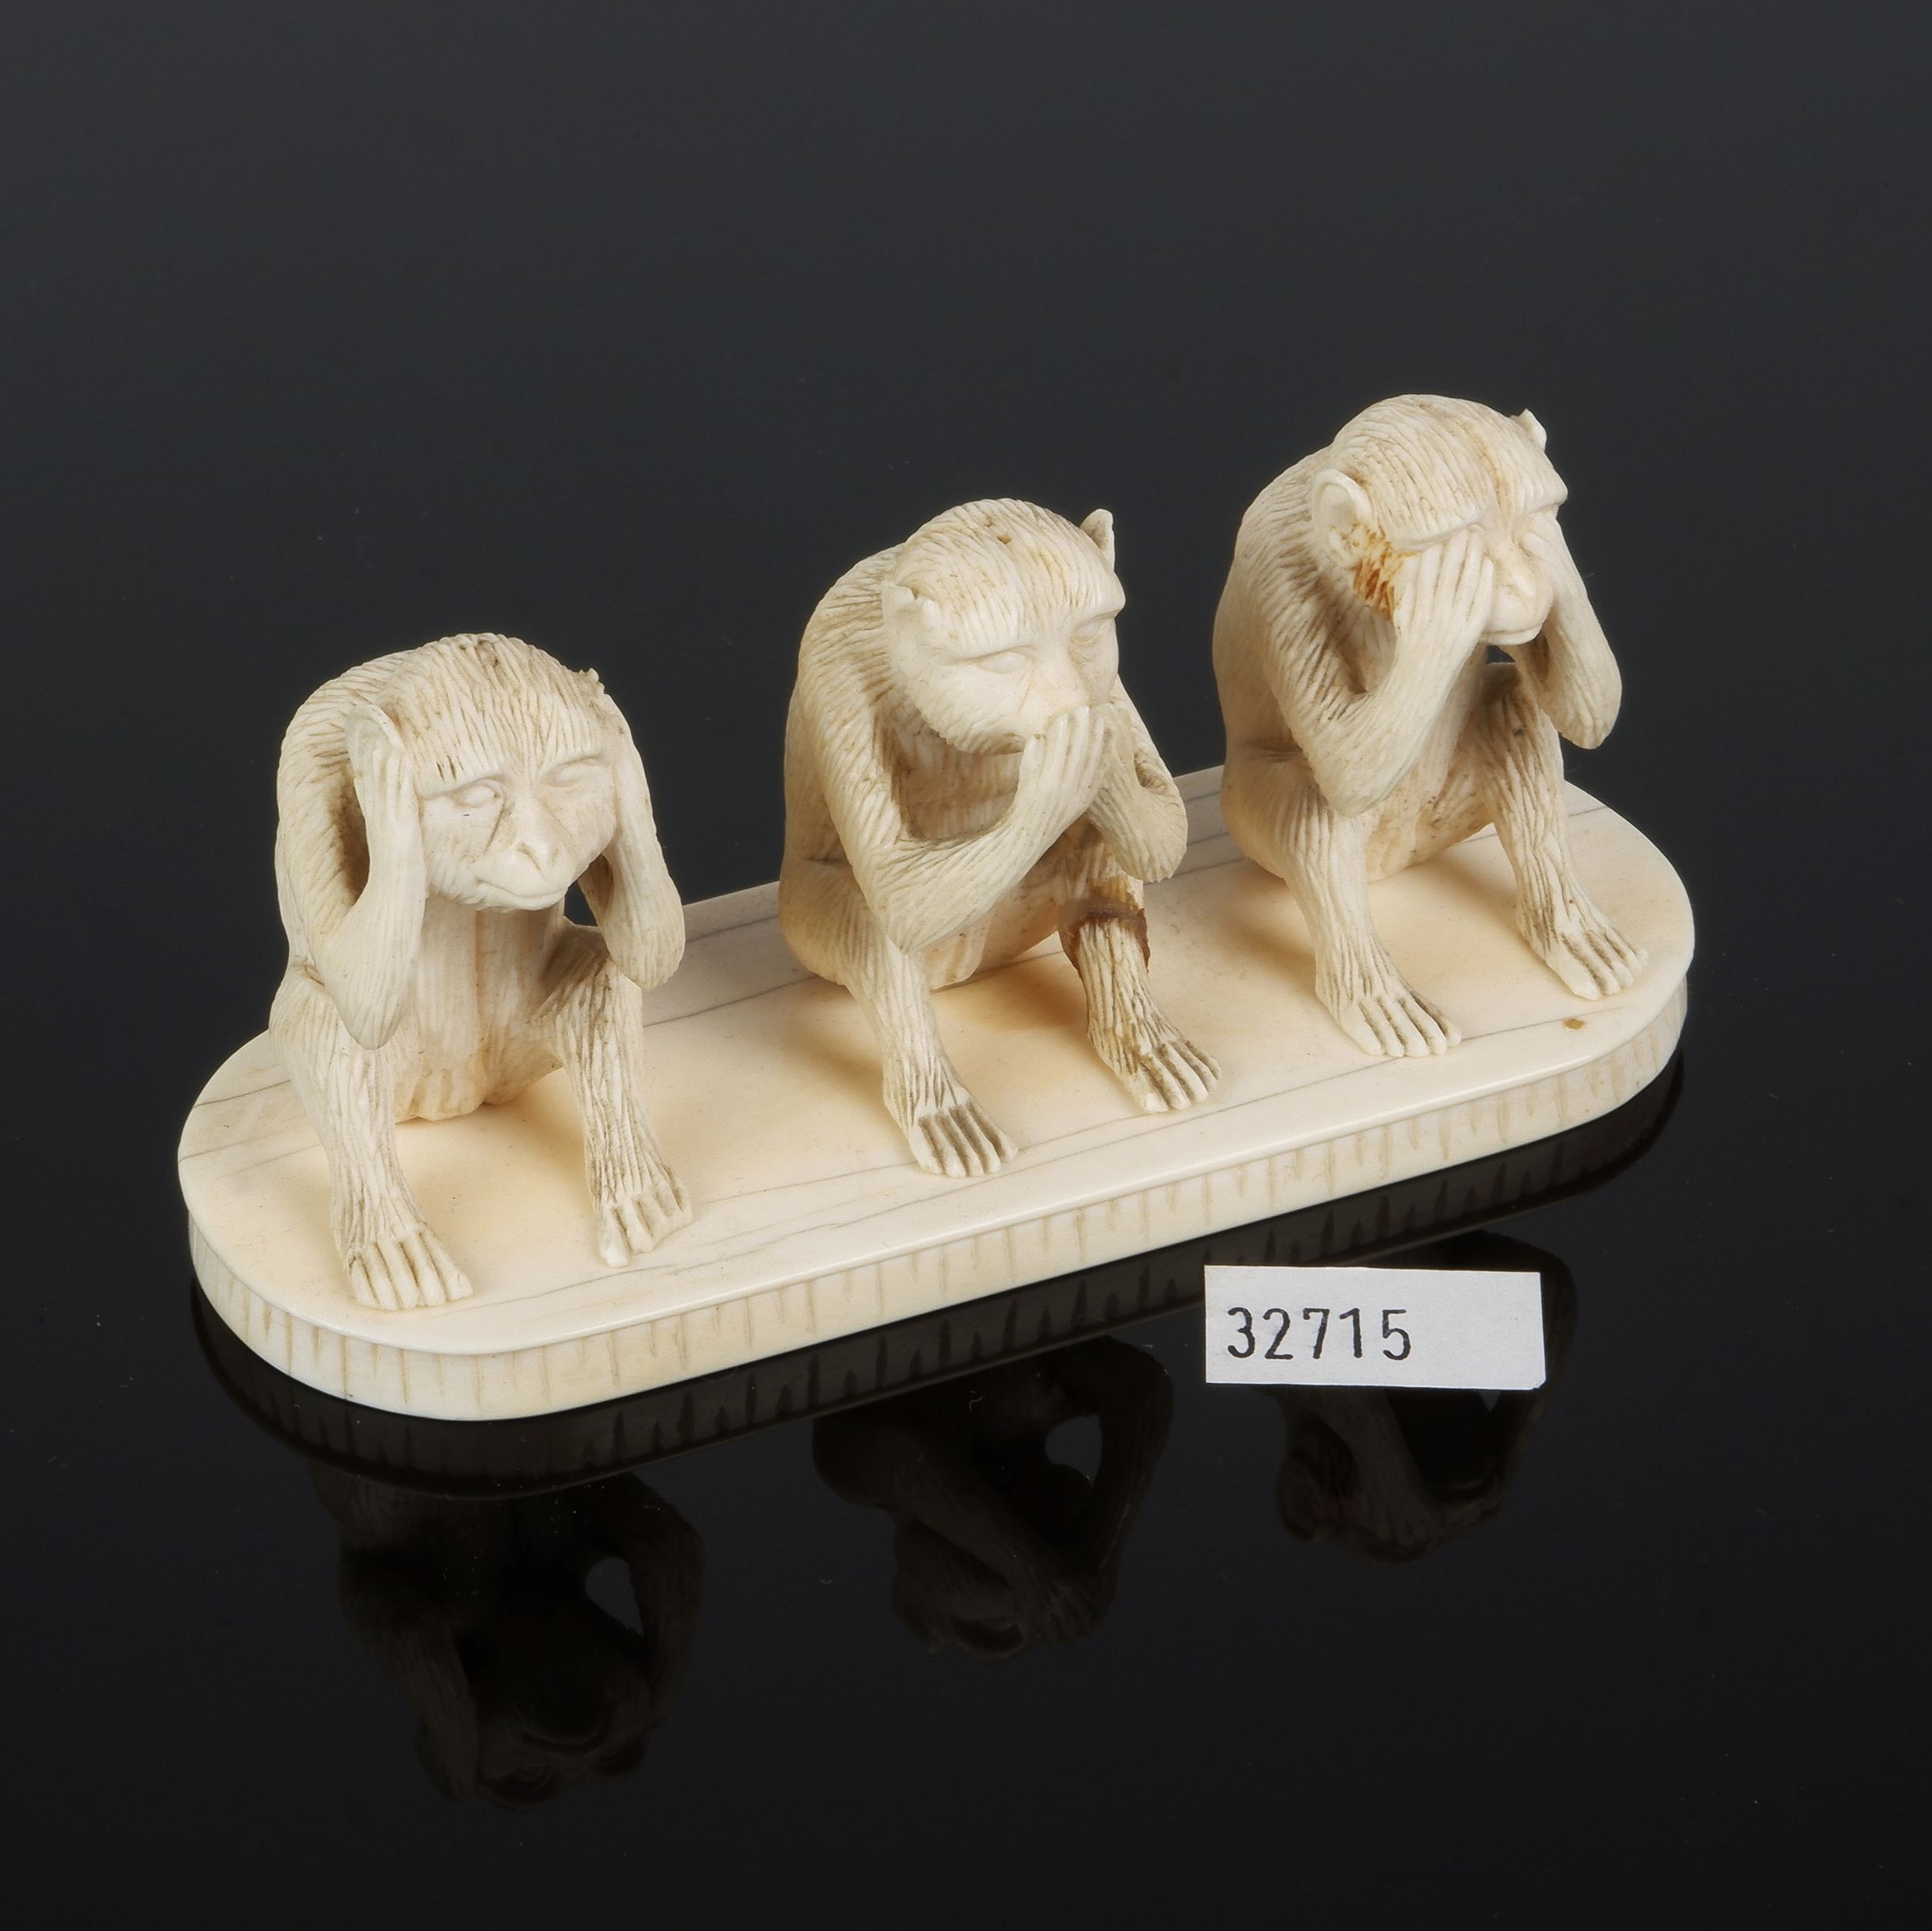 'Antique Carved Ivory Group of the Three Wise Monkeys'